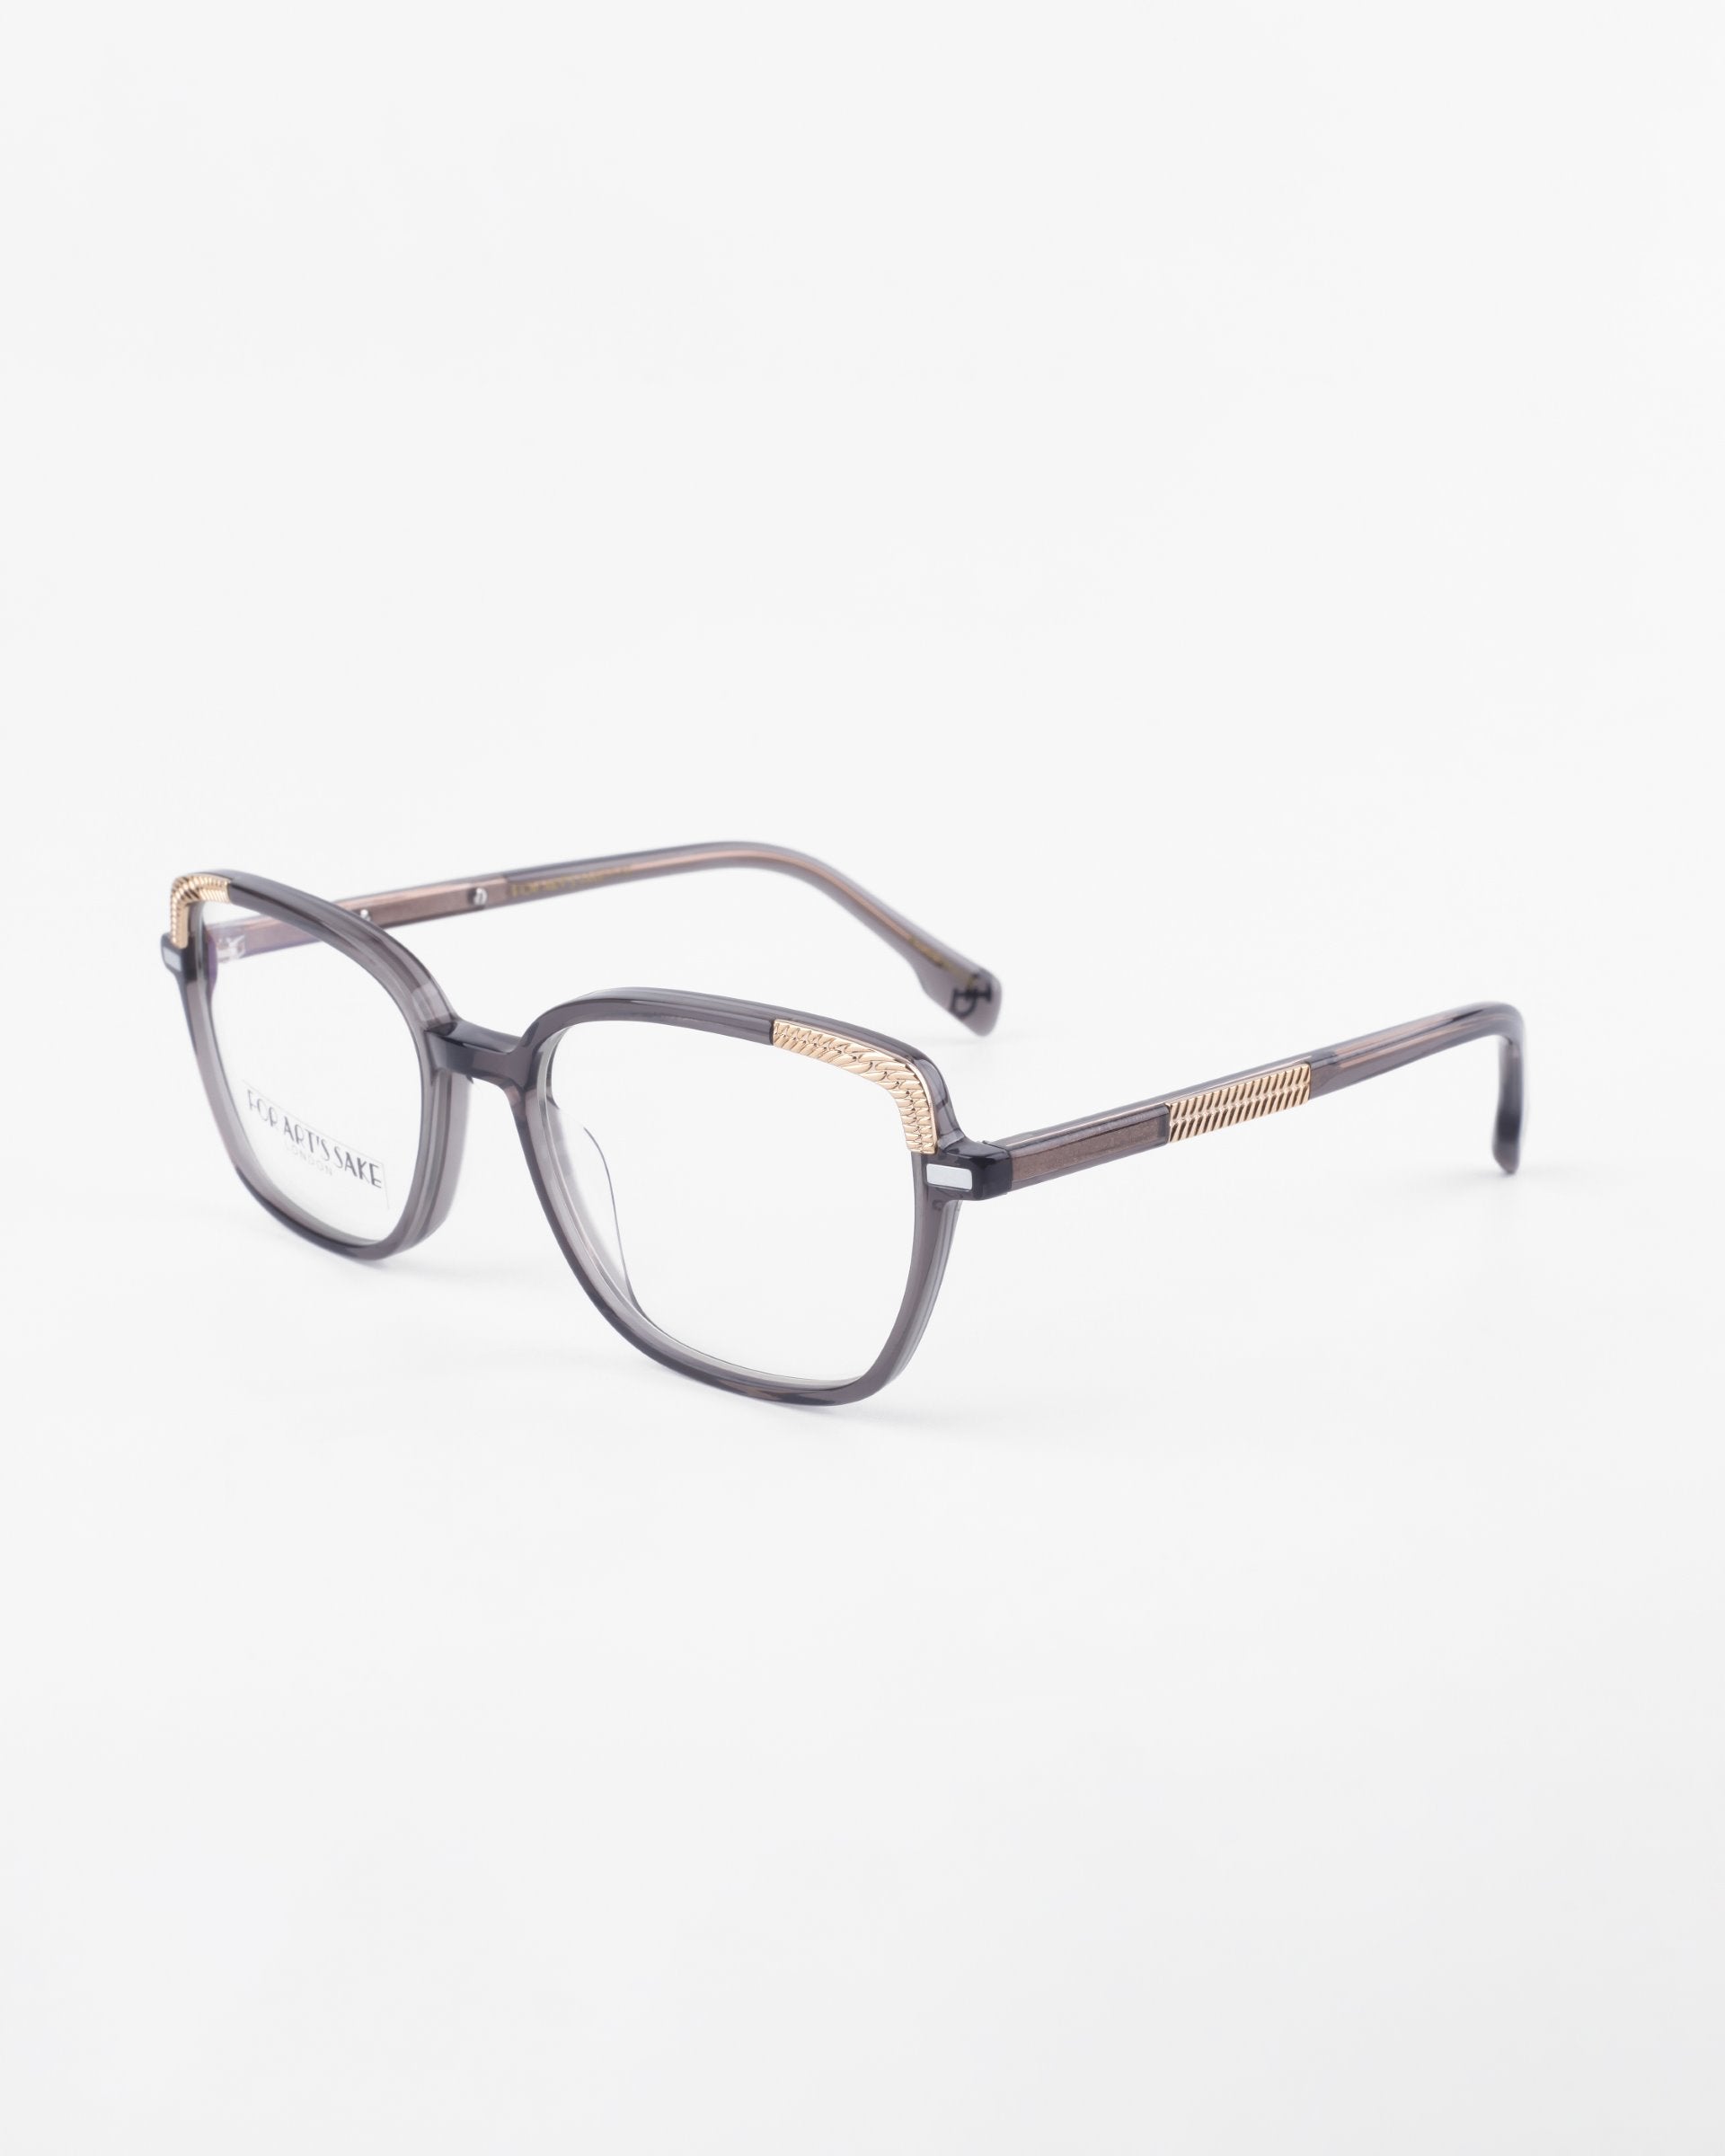 A pair of For Art's Sake® Mimosa eyeglasses with sleek dark frames and 18-karat gold-plated accents along the temples. The design is modern with a subtle elegance, ideal for both professional and casual wear. Featuring clear lenses with a blue light filter, the overall style is contemporary.